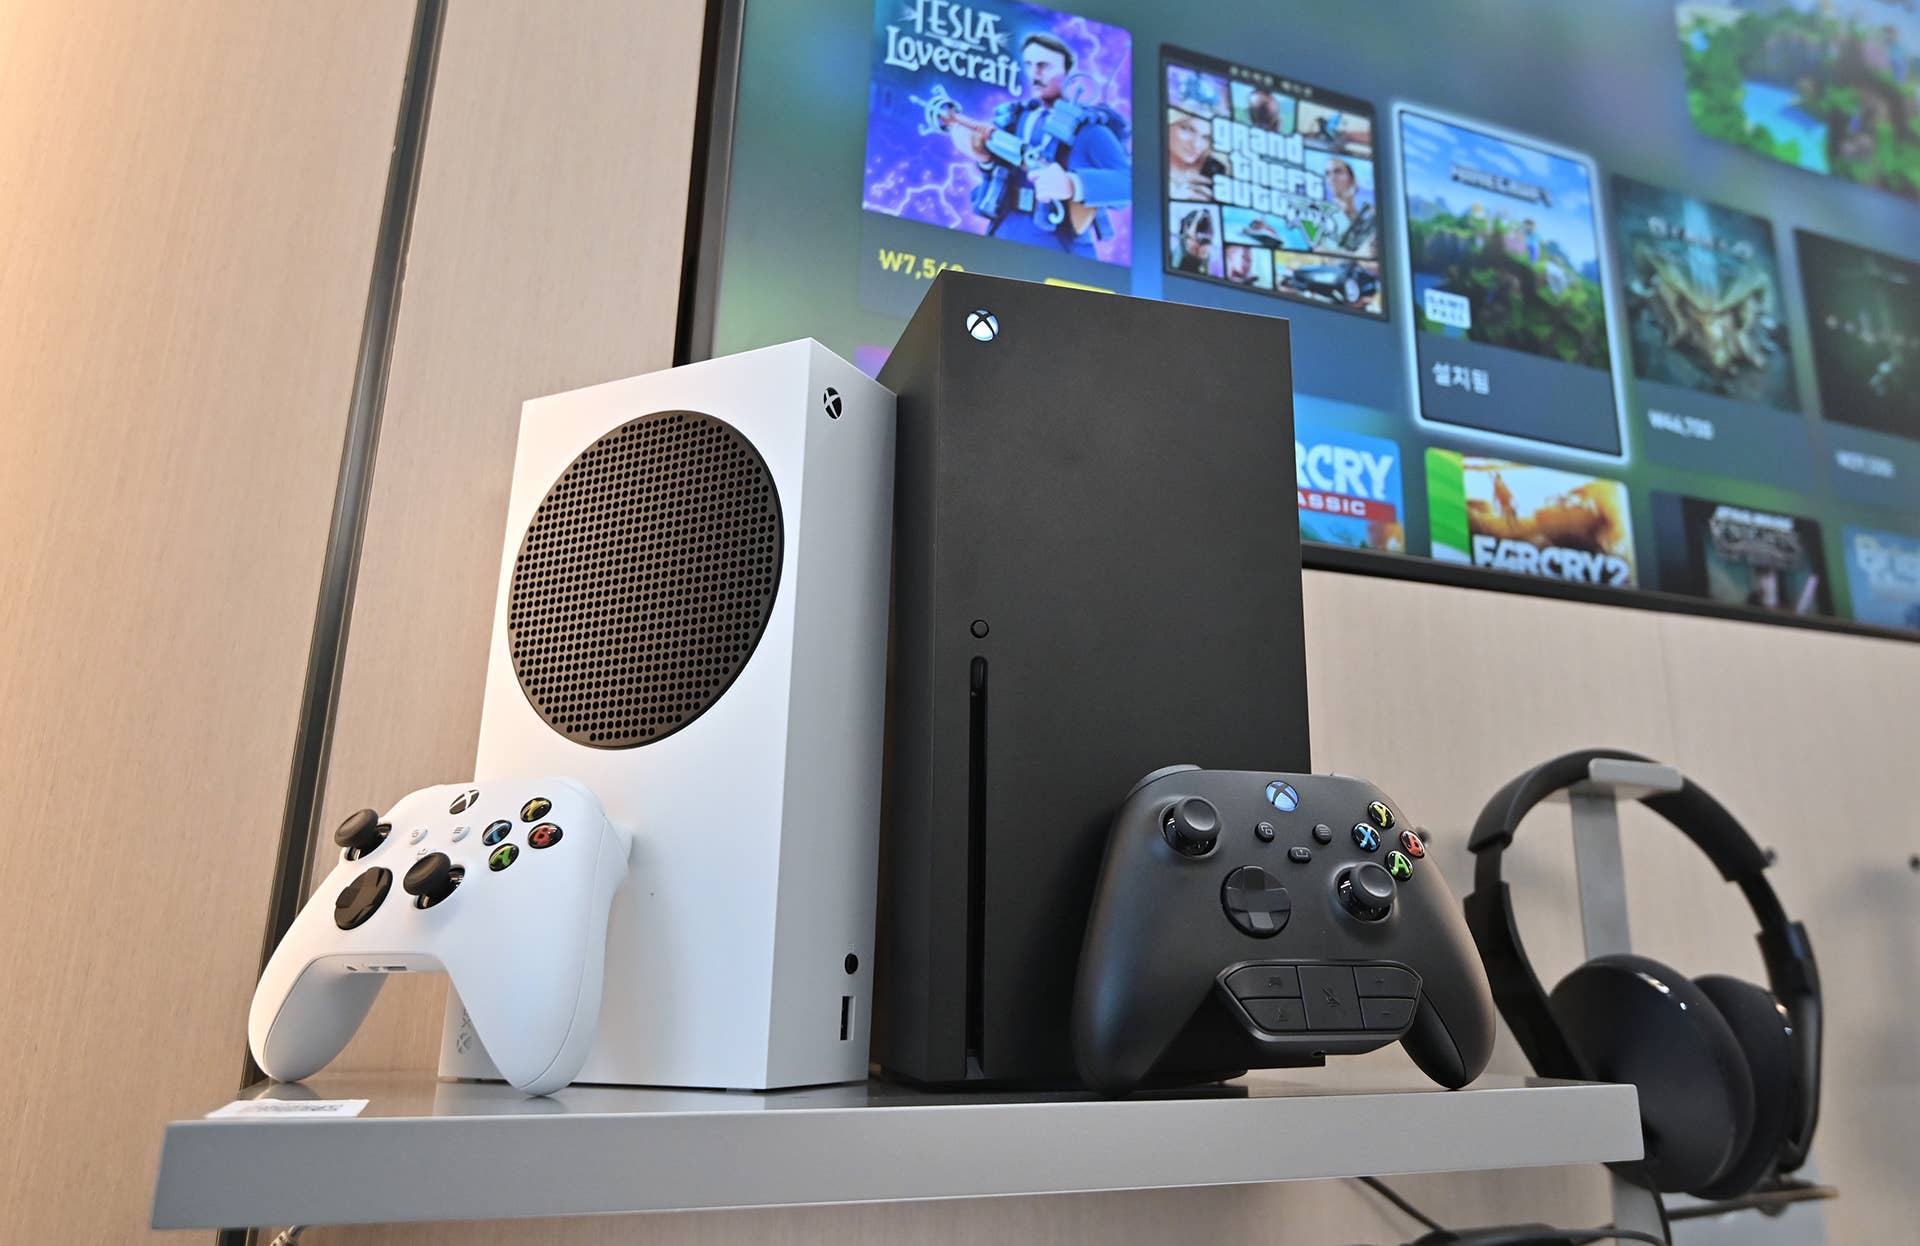 Microsoft's Xbox Series X (black) and series S (white) gaming consoles